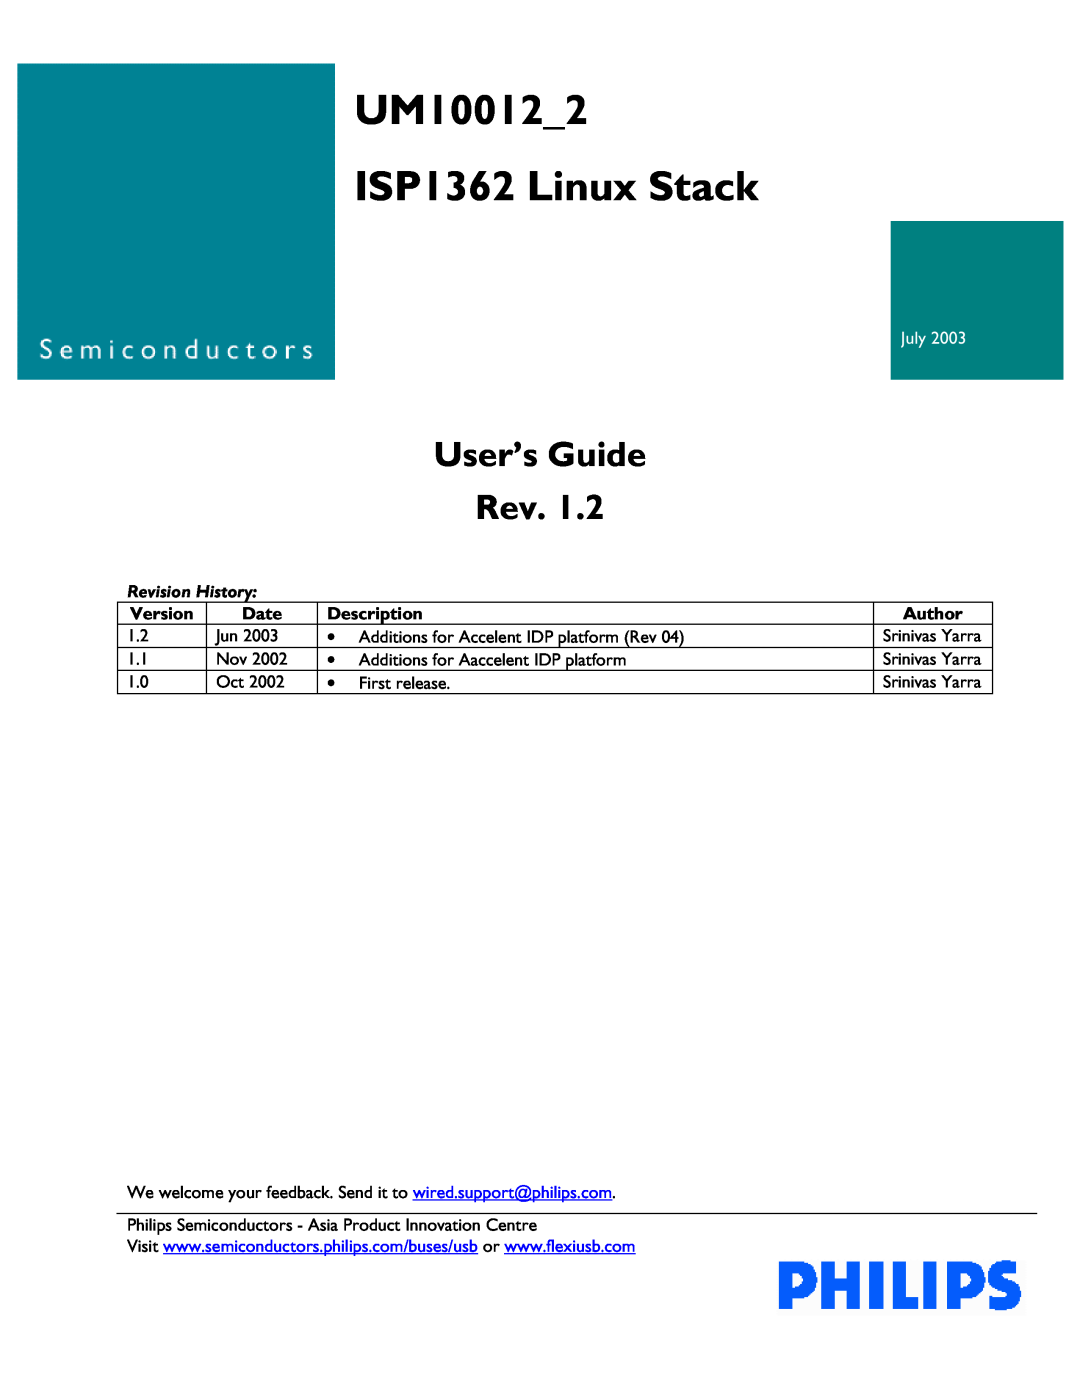 Philips manual UM10012_2 ISP1362 Linux Stack, User’s Guide Rev, July, Revision History 